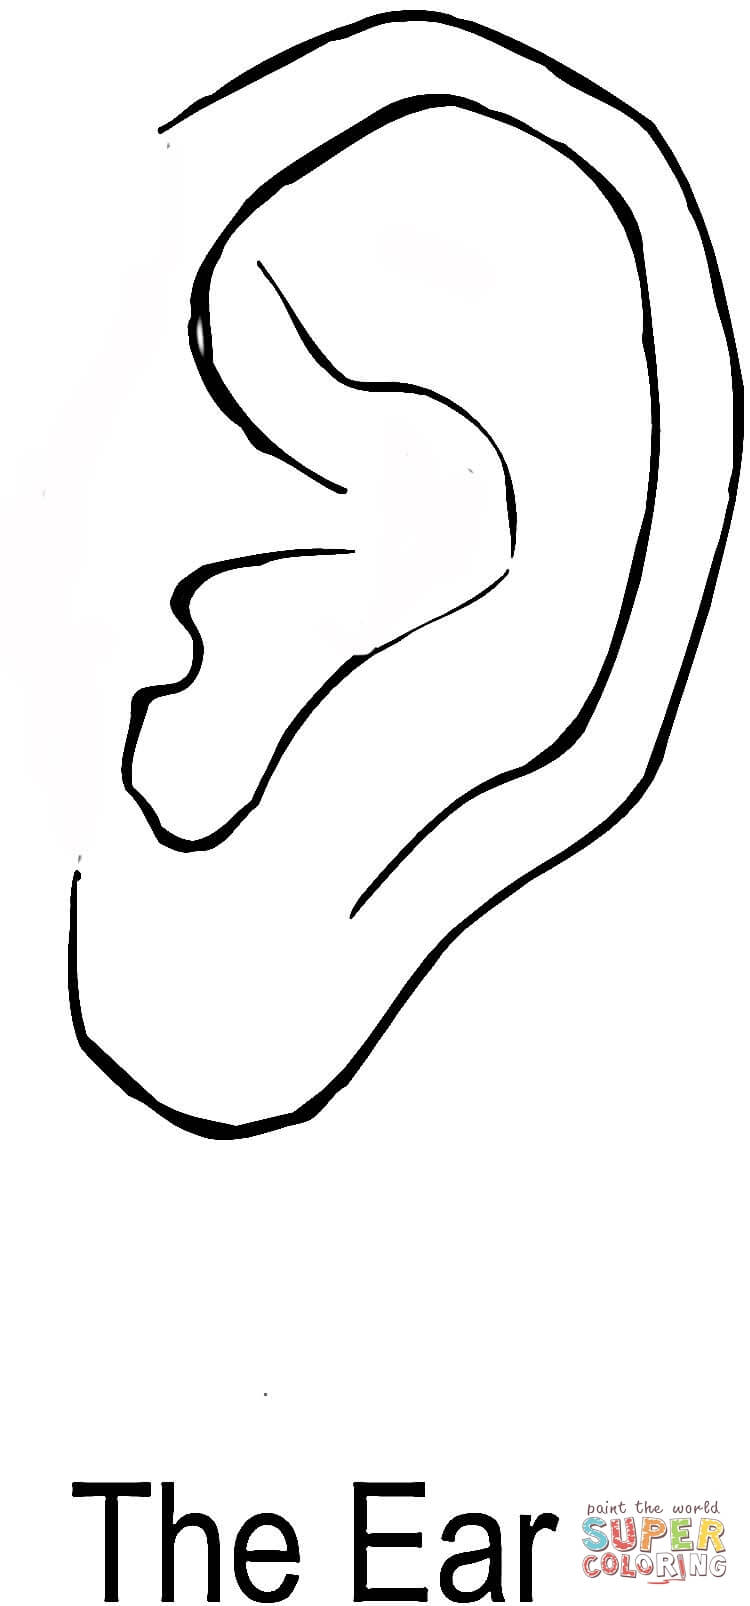 The Ear coloring page | Free Printable Coloring Pages